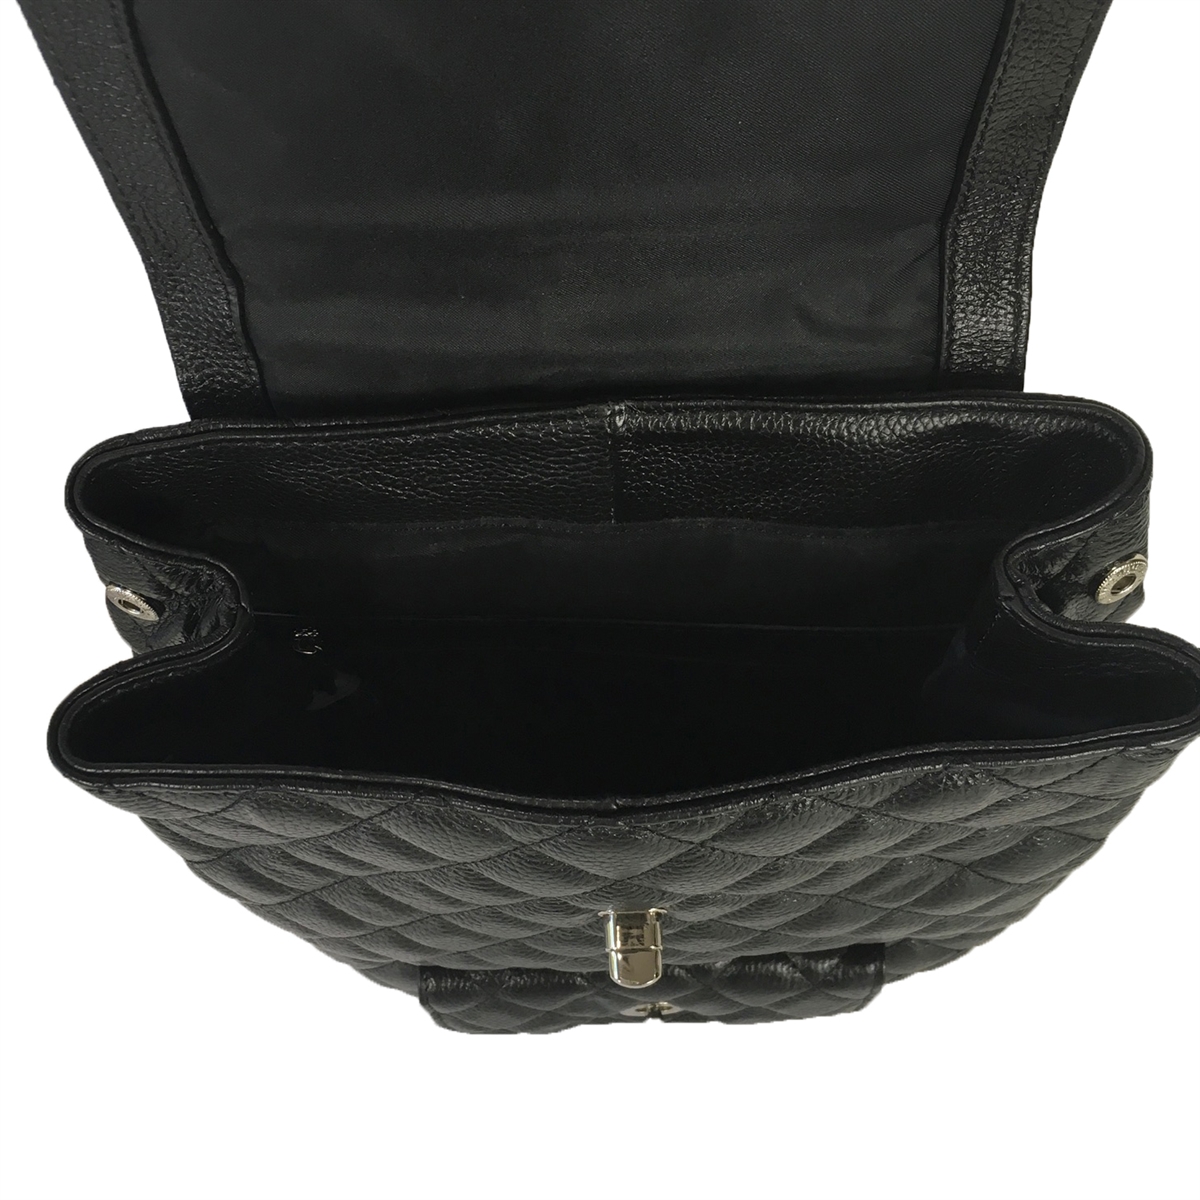 Adrienne Vittadini Travel Hanging Cosmetic Pouch Case, Black/Grey